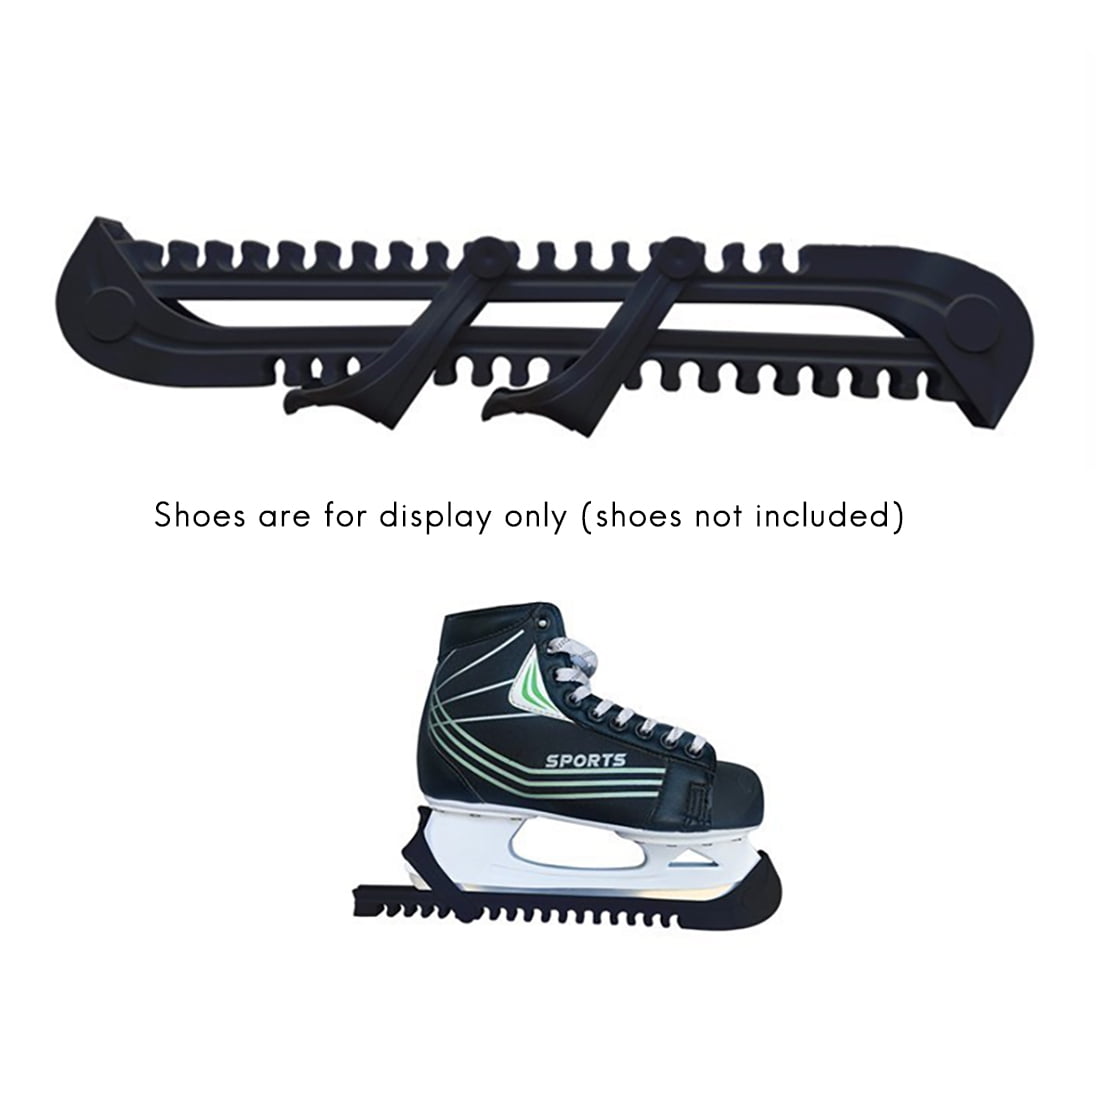 A&r Figure Skate Blade Guard Cover With Flexible Attachment & Drain Holes Teal 4 for sale online 